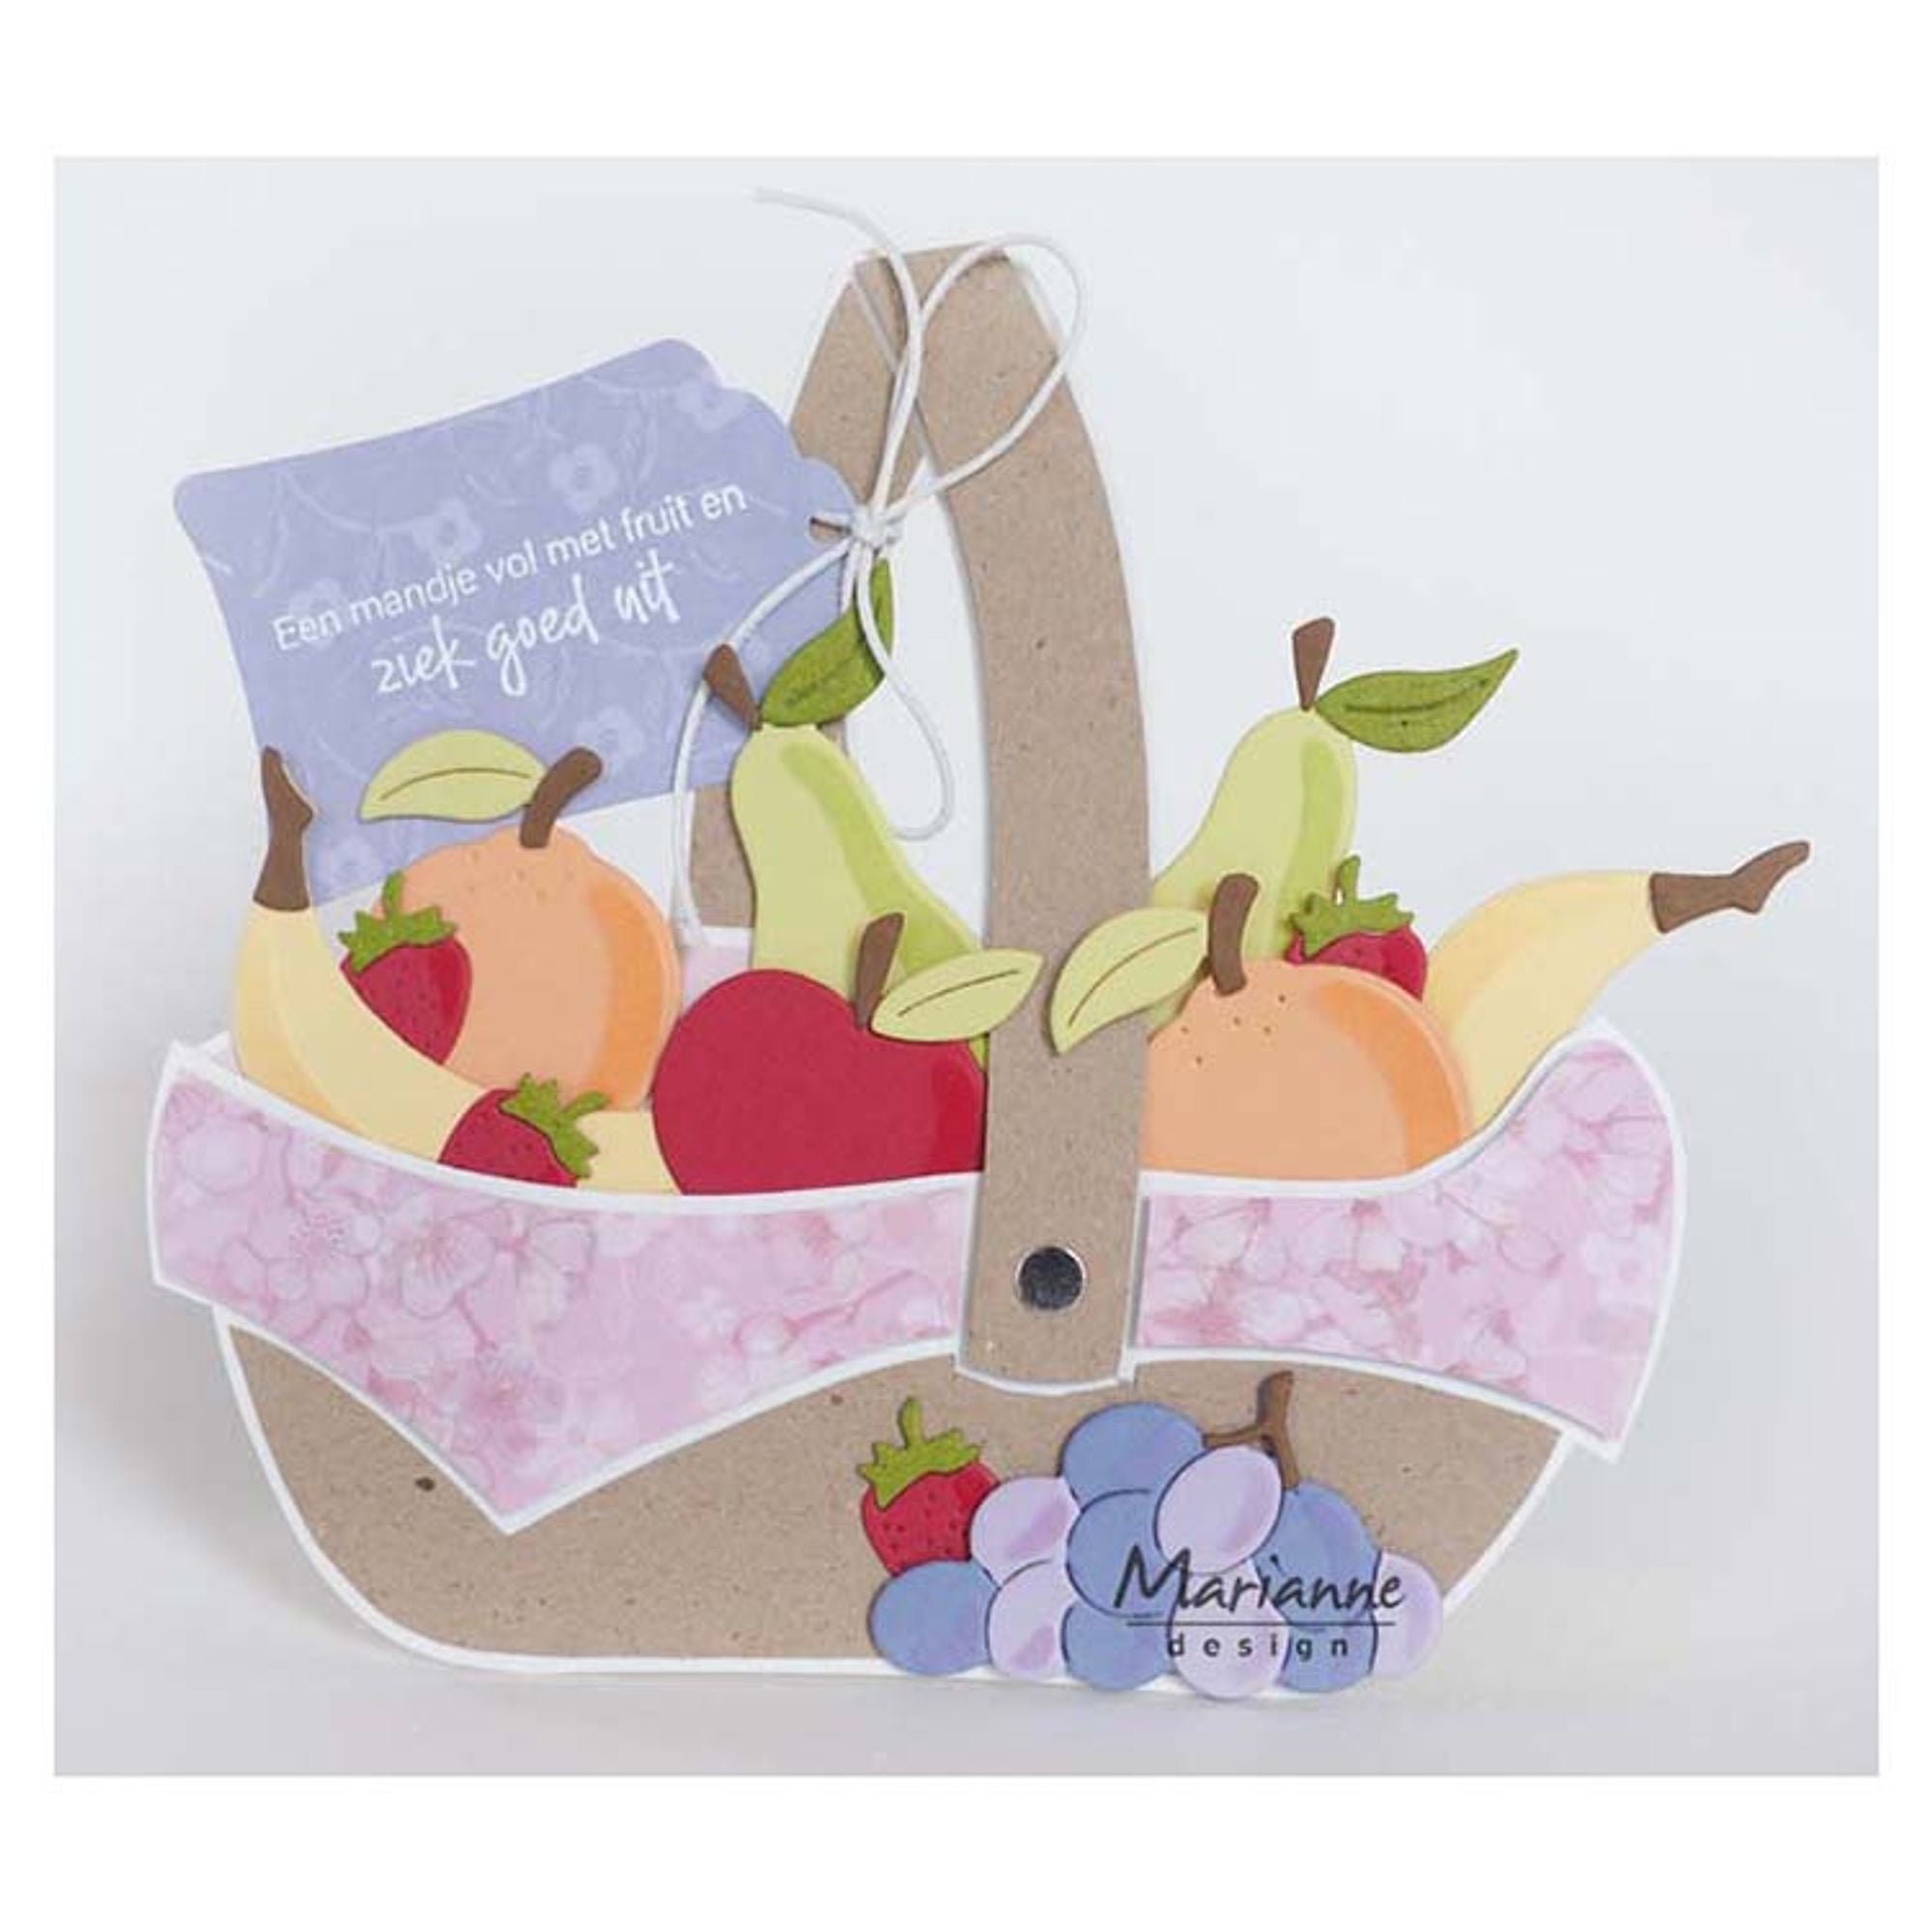 Marianne Design Collectables Fruit by Marleen